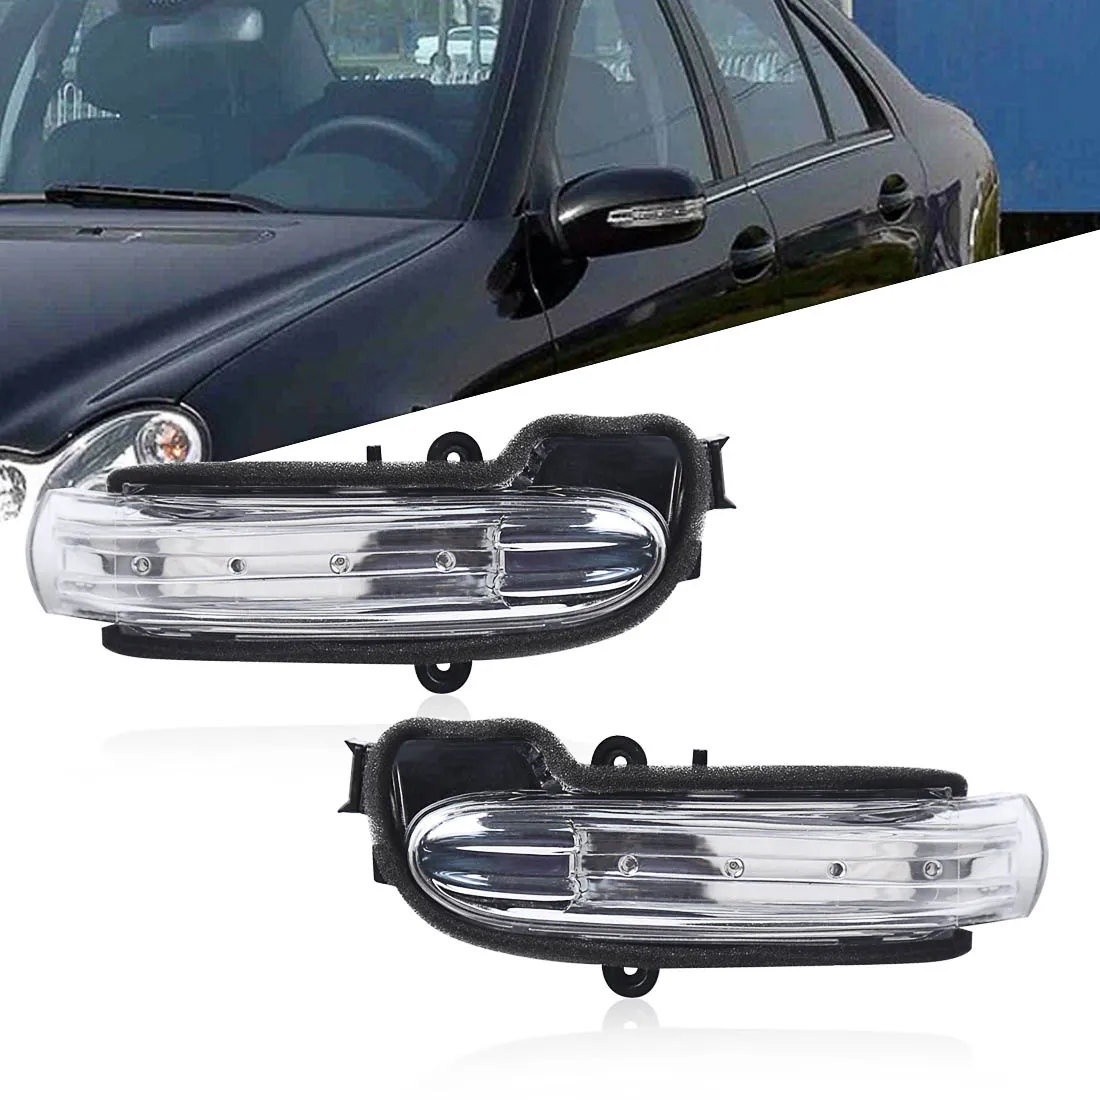 2PCS LED Rear View Mirror Turn Signal Light For Mercedes-Benz W203 2004-2007 Door Wing Rearview Rear View Mirror Lamp